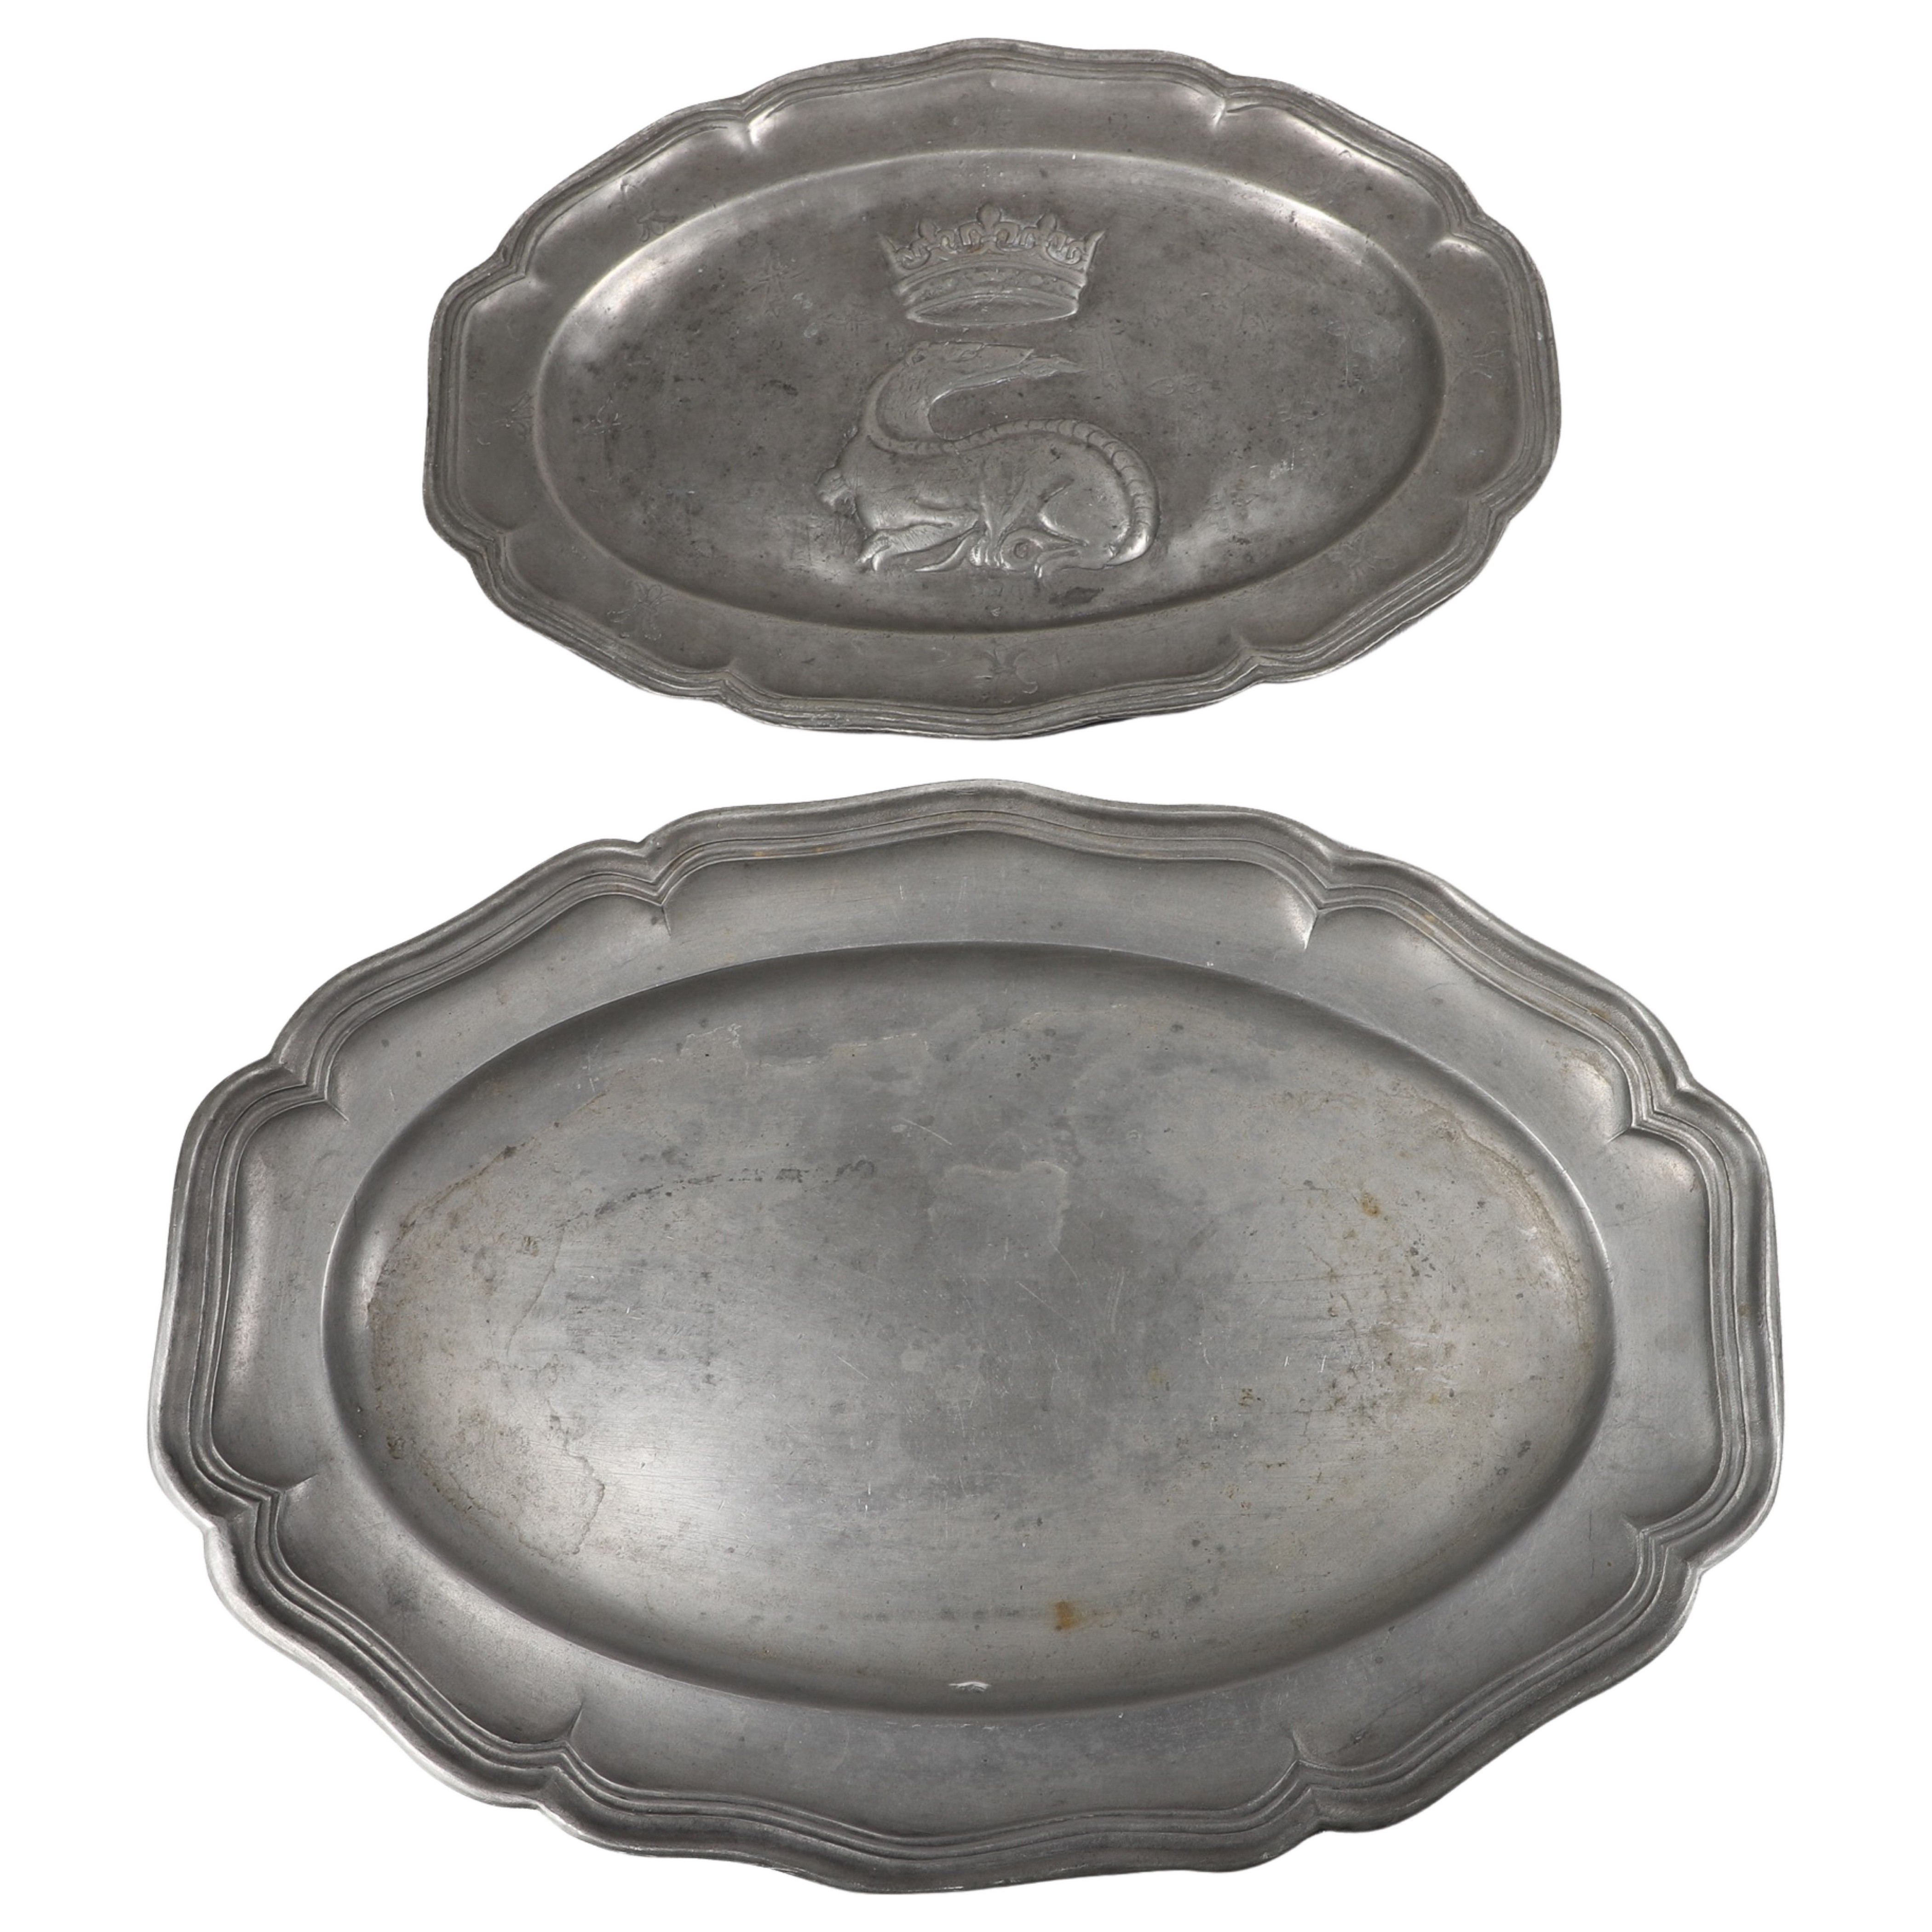  2 18th C pewter trays each marked 3b4823